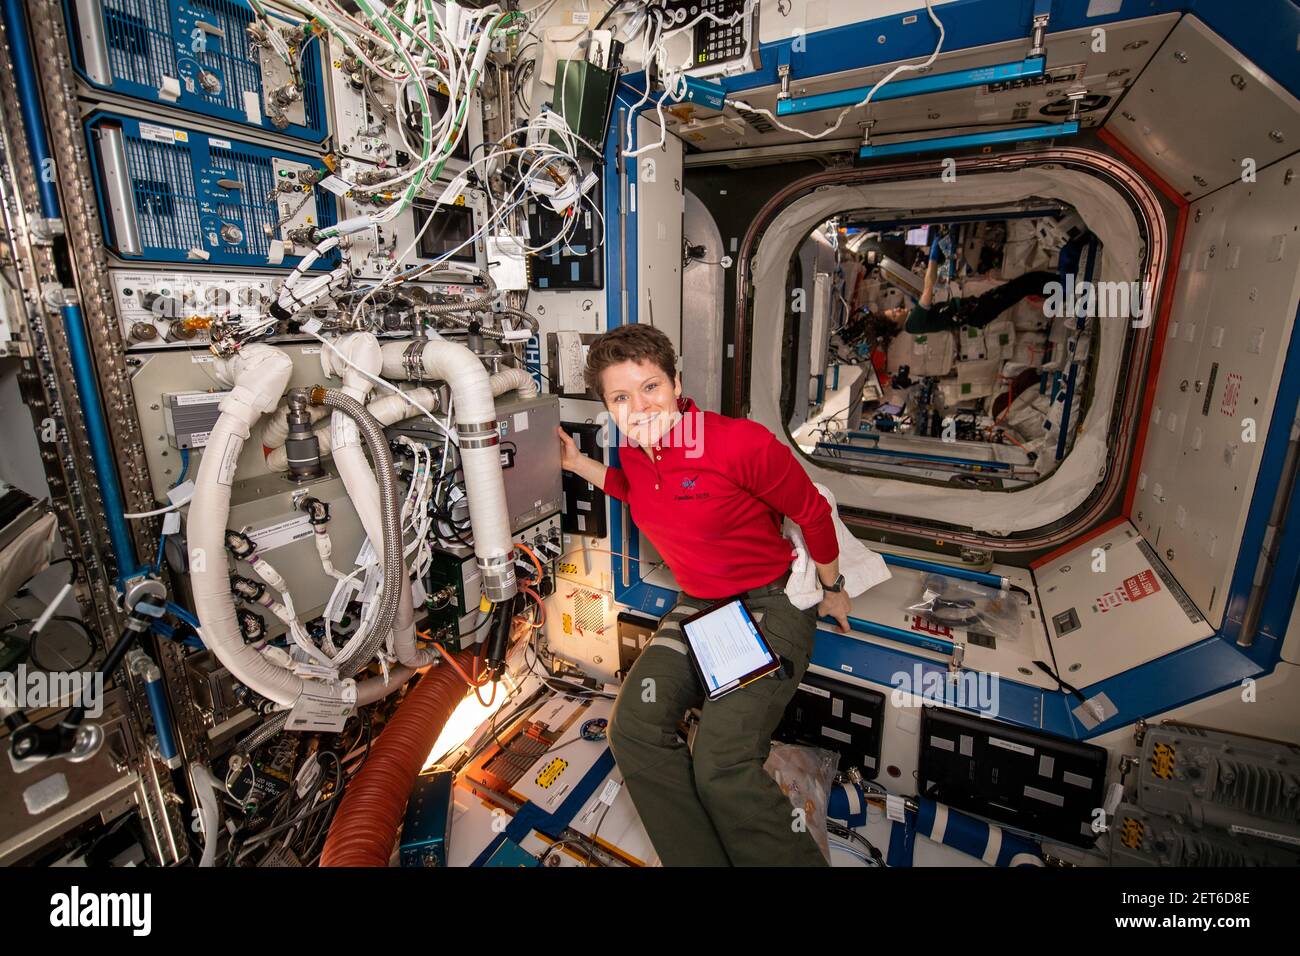 NASA Astronaut Anne MClain installing the Thermal Amine Scrubber, which removes CO2 from the International Space Station, April 25, 2019, by NASA/DPA Stock Photo